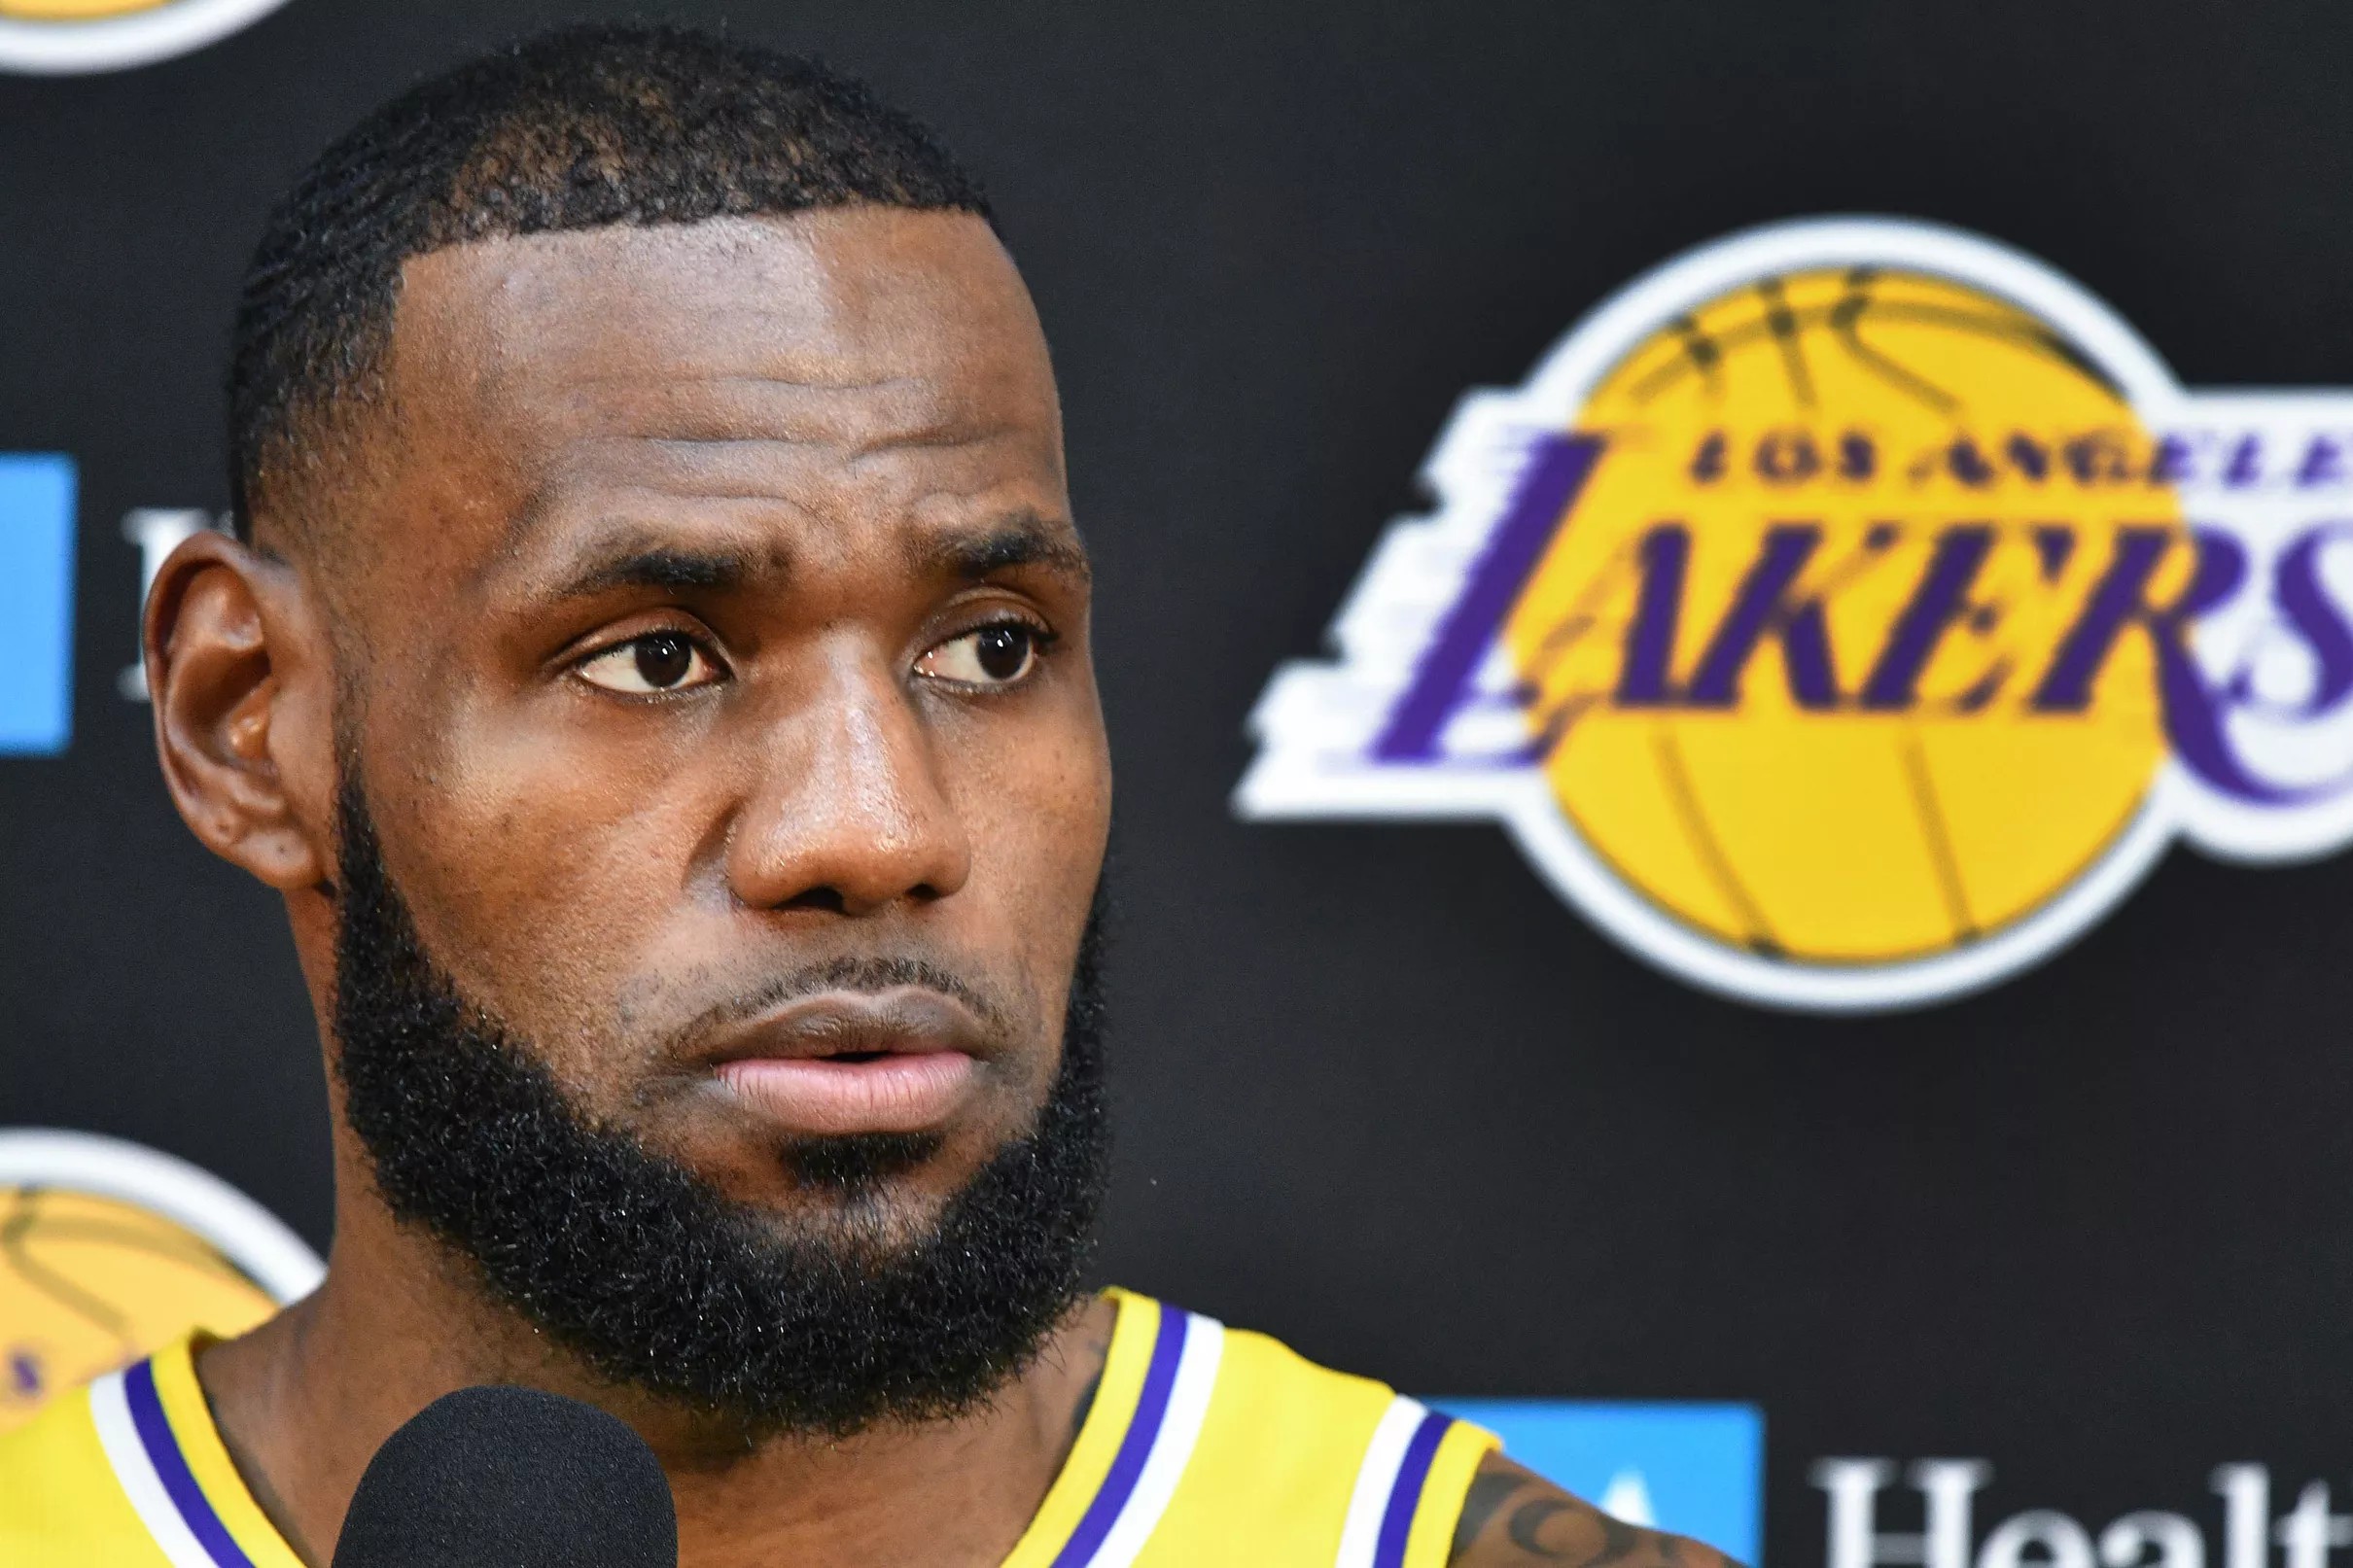 LeBron James will aim to win a championship with the Lakers this season